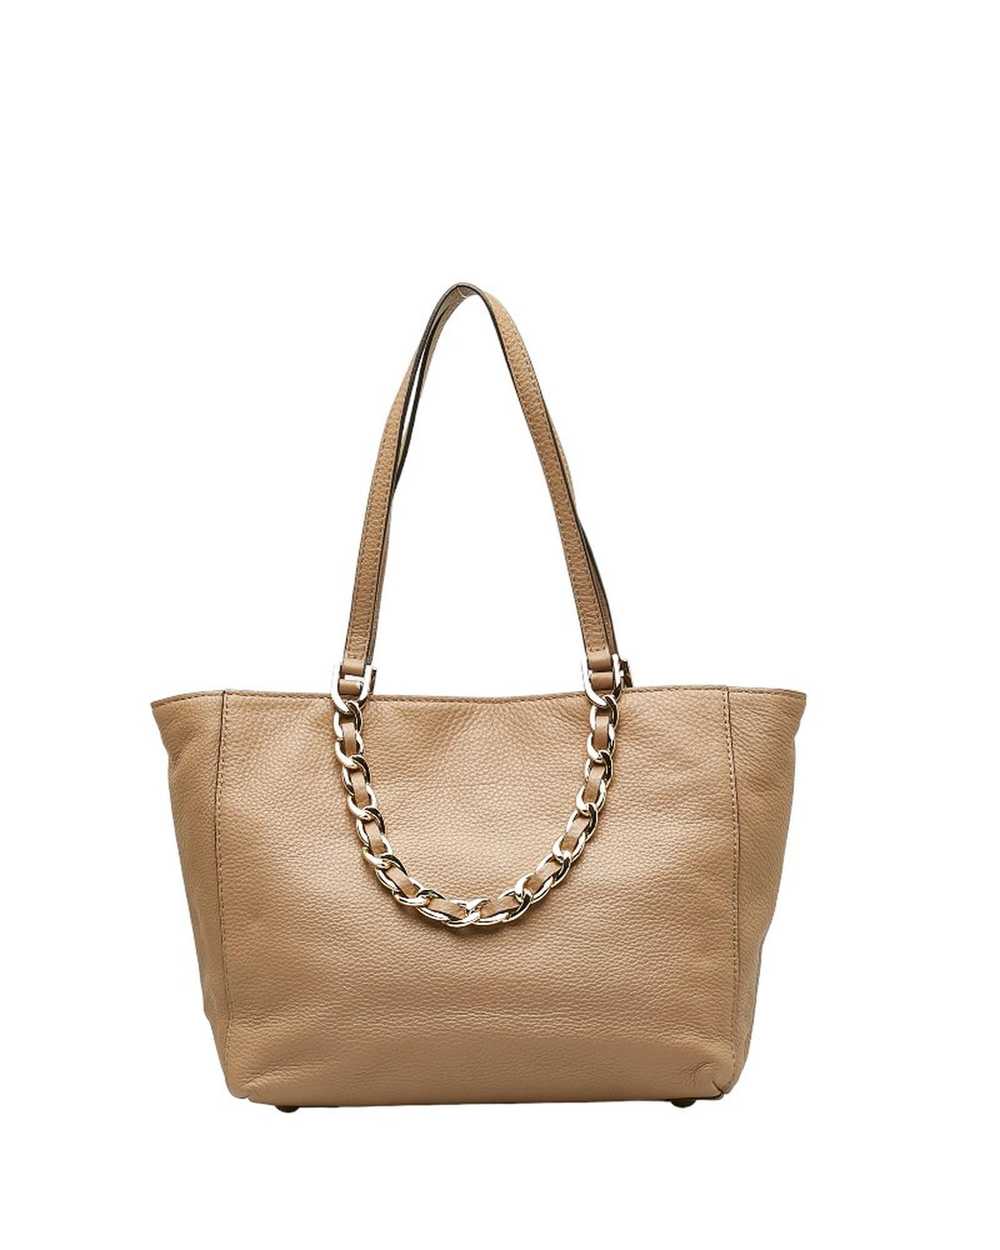 Michael Kors Leather Chained Tote Bag in Brown - image 3